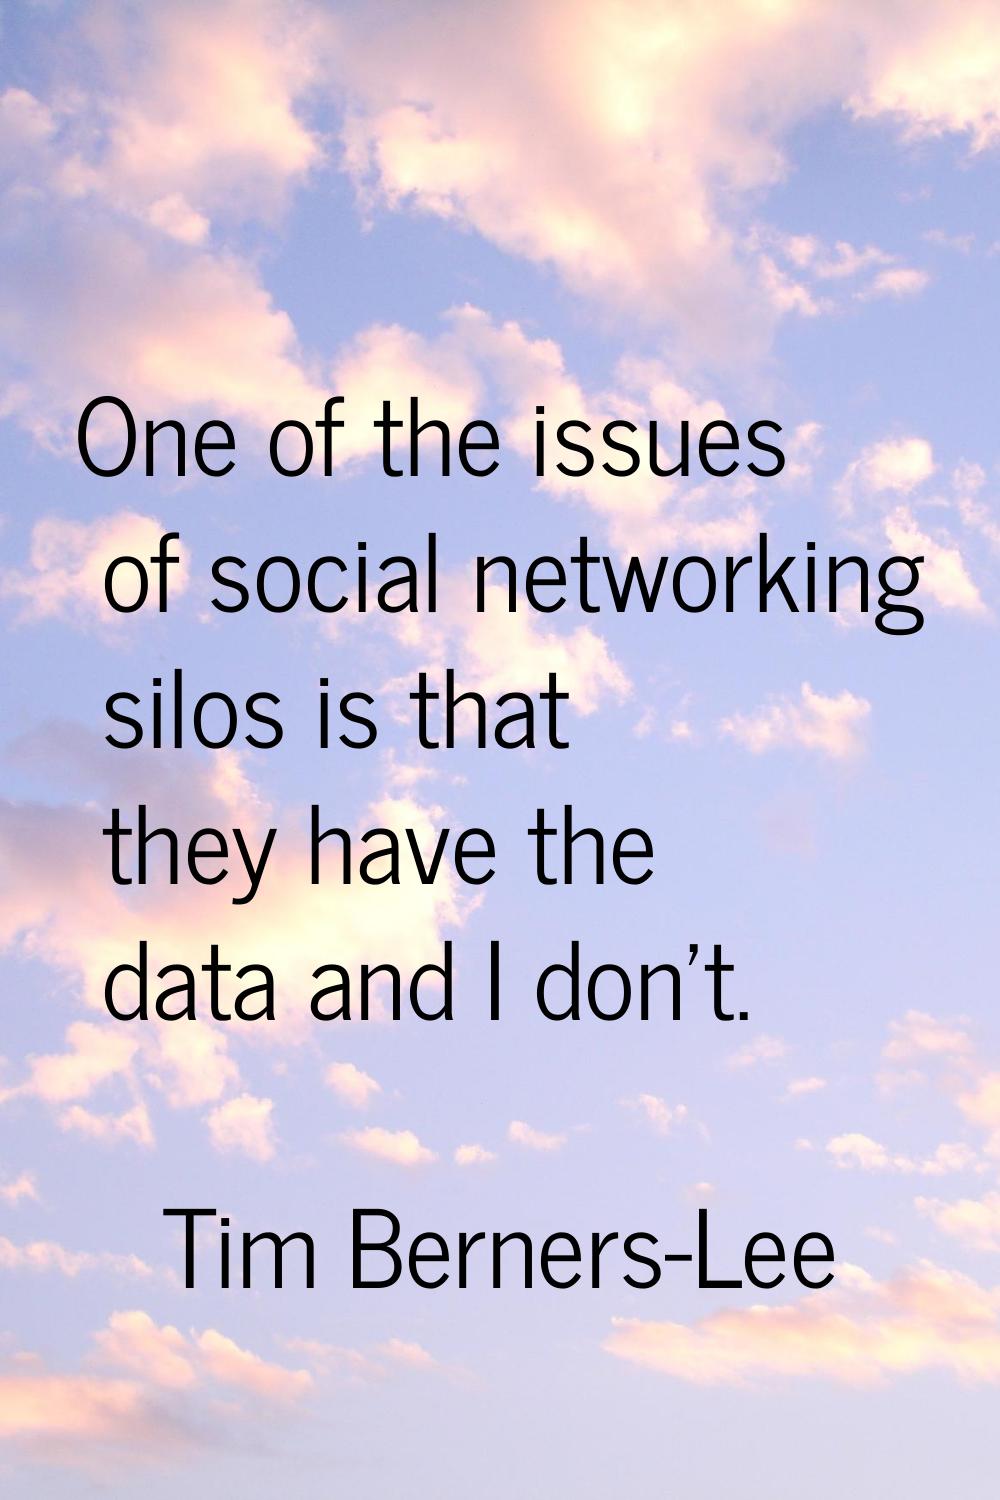 One of the issues of social networking silos is that they have the data and I don't.